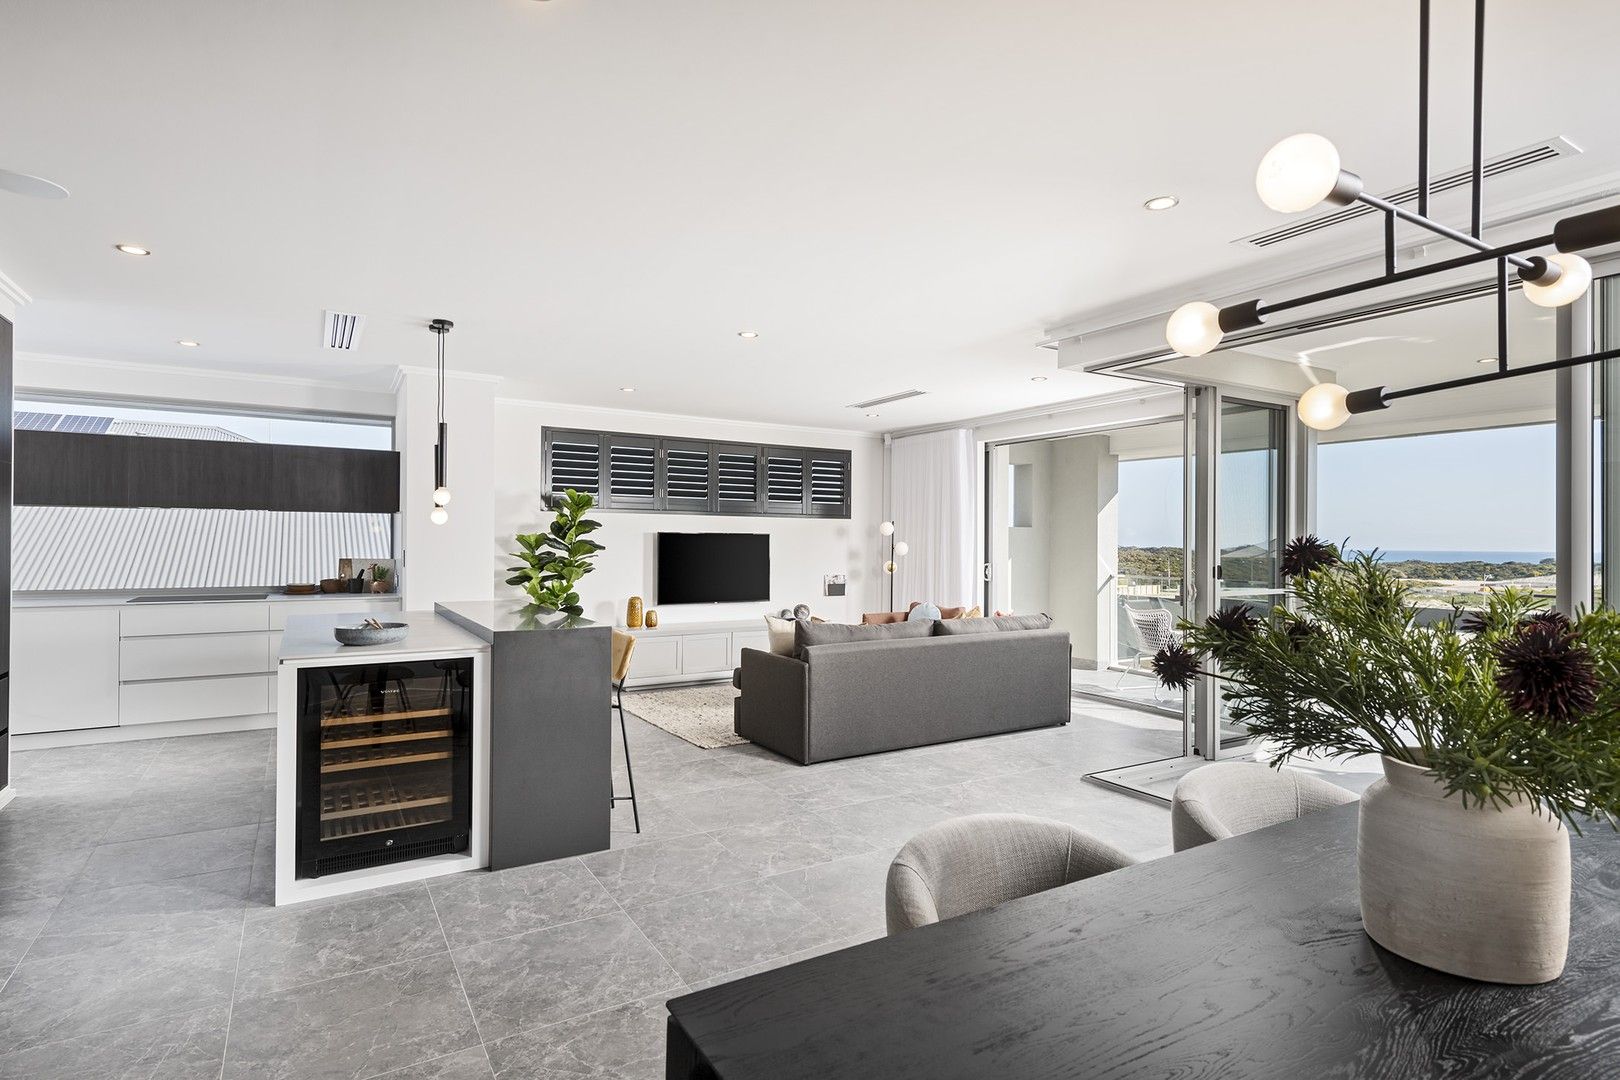 4 bedrooms New House & Land in Reefview Rise BURNS BEACH WA, 6028